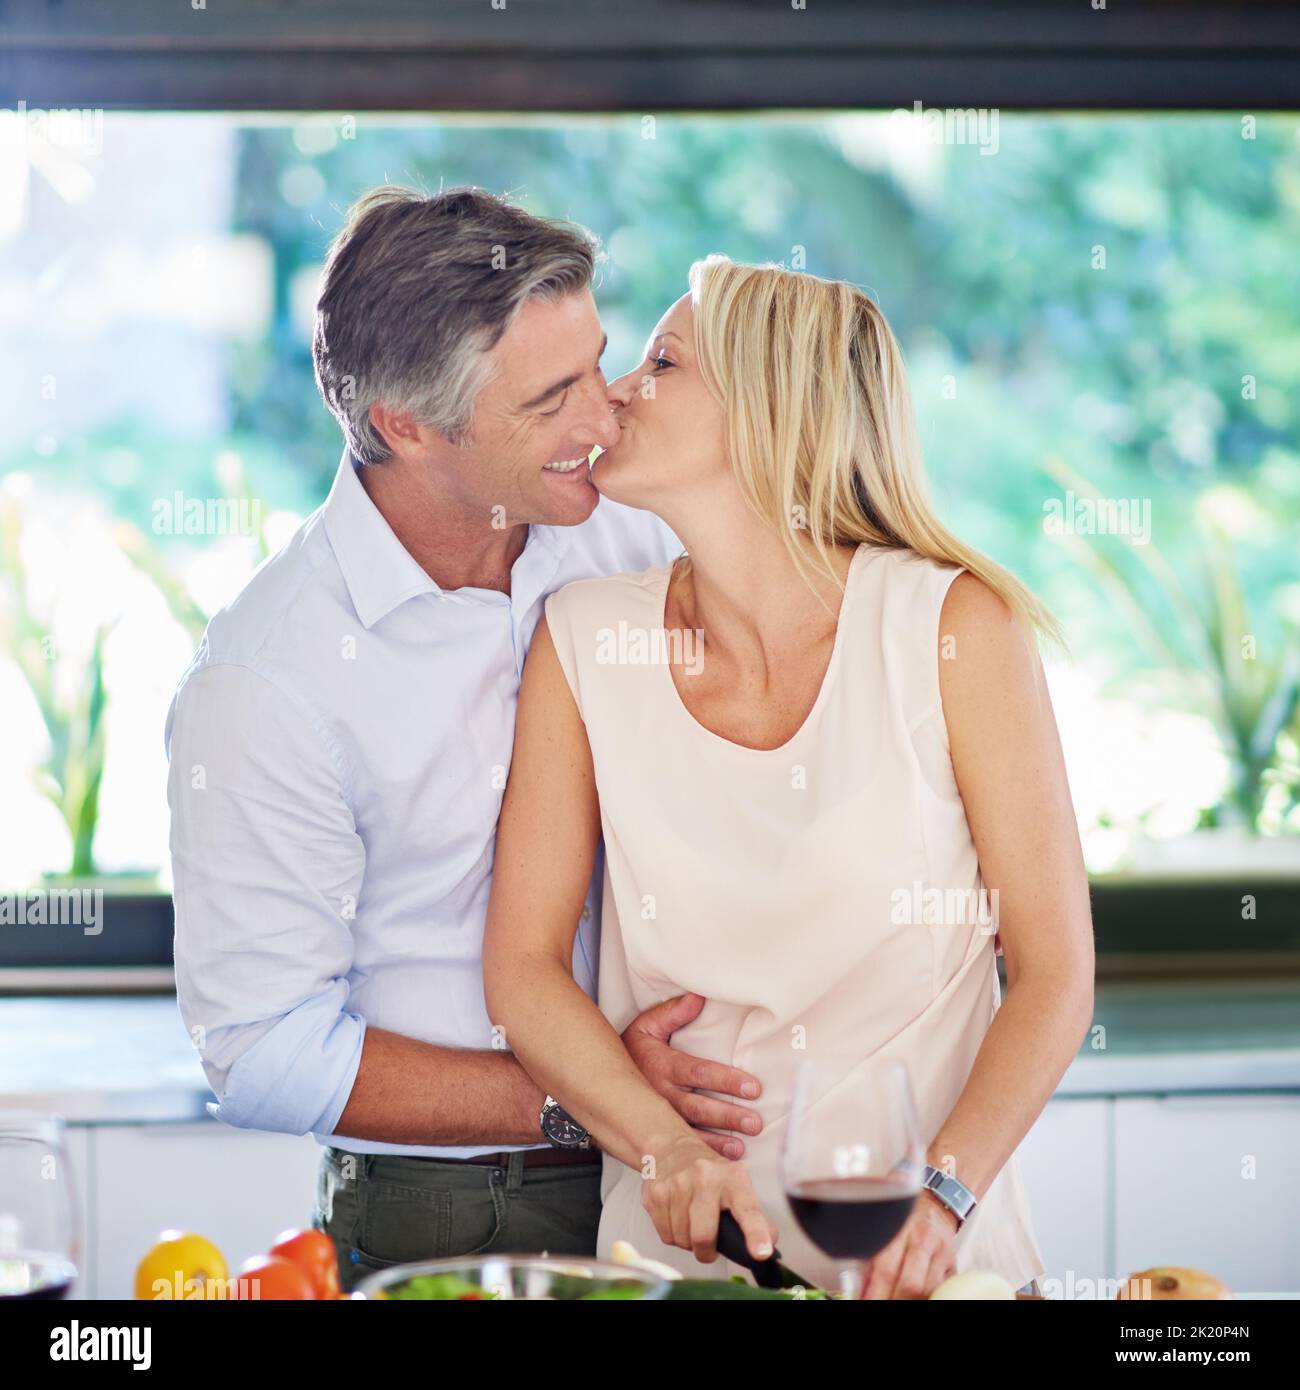 Kitchen romance. an affectionate couple cooking dinner. Stock Photo